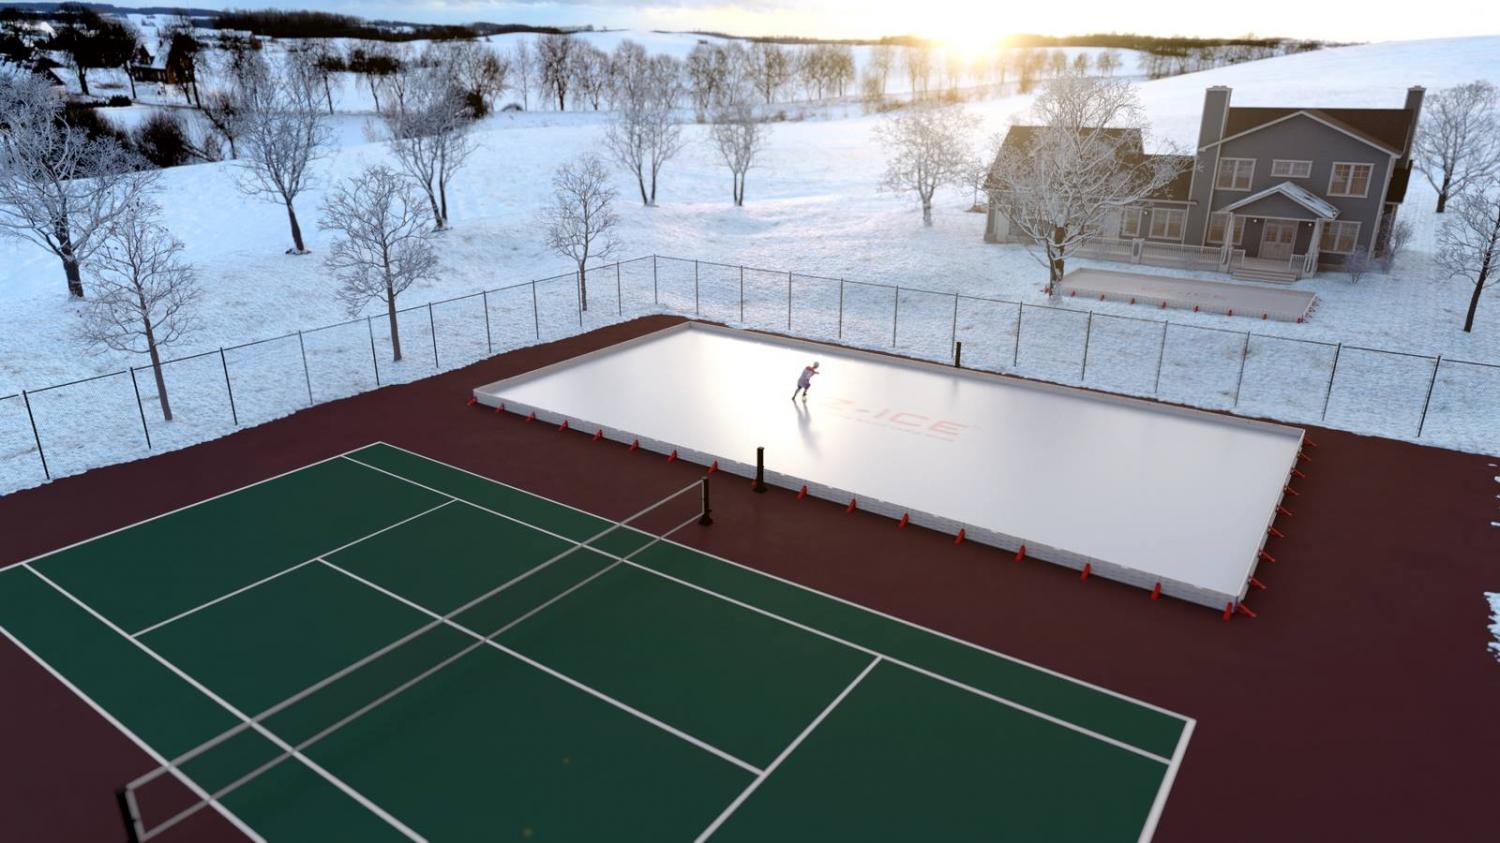 EZ Ice Rink - DIY Backyard Ice Rink That Sets Up in 1 Hour